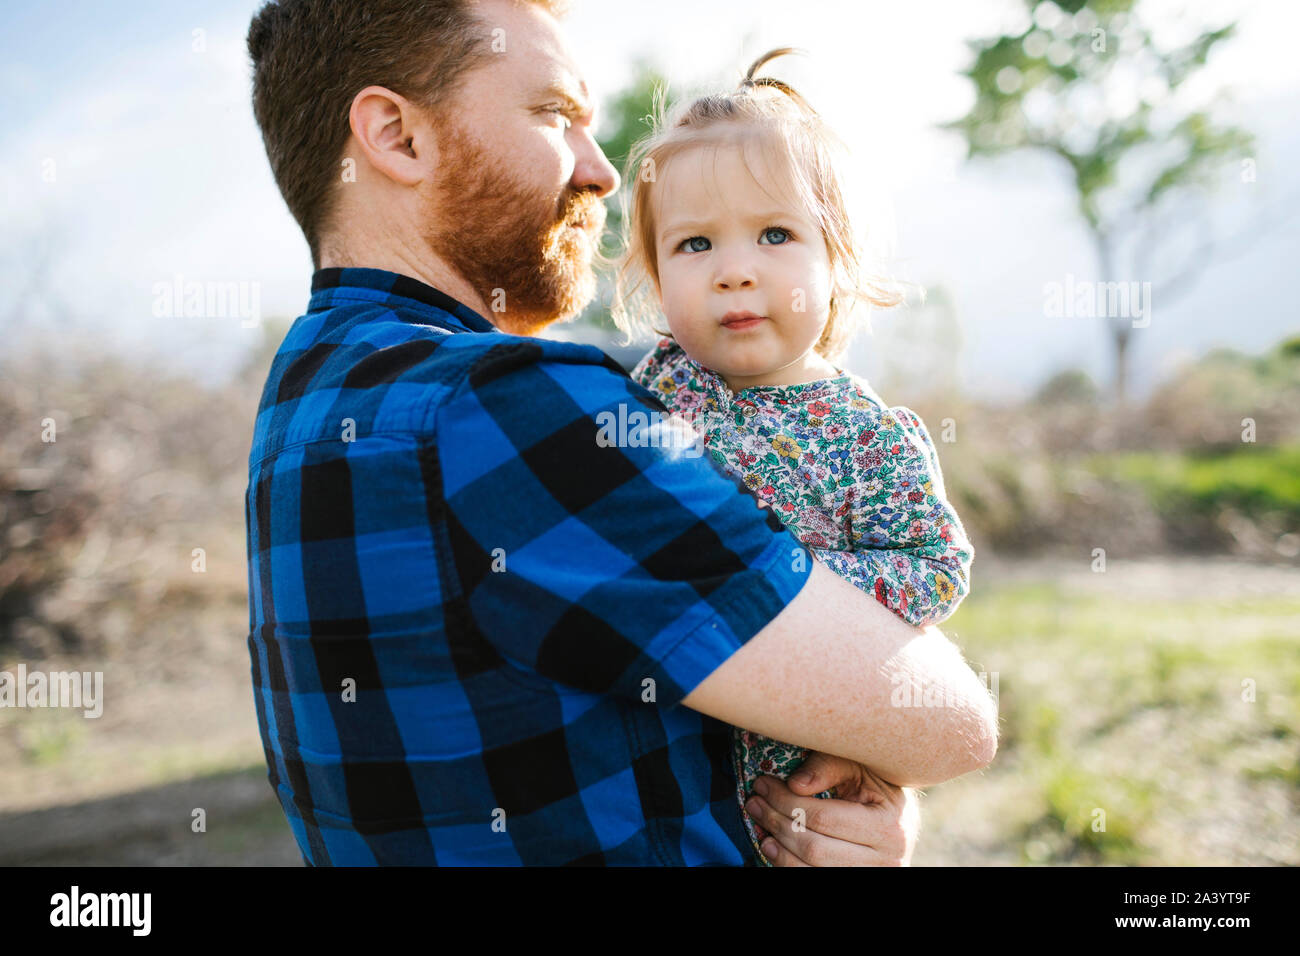 Father holding baby girl Stock Photo